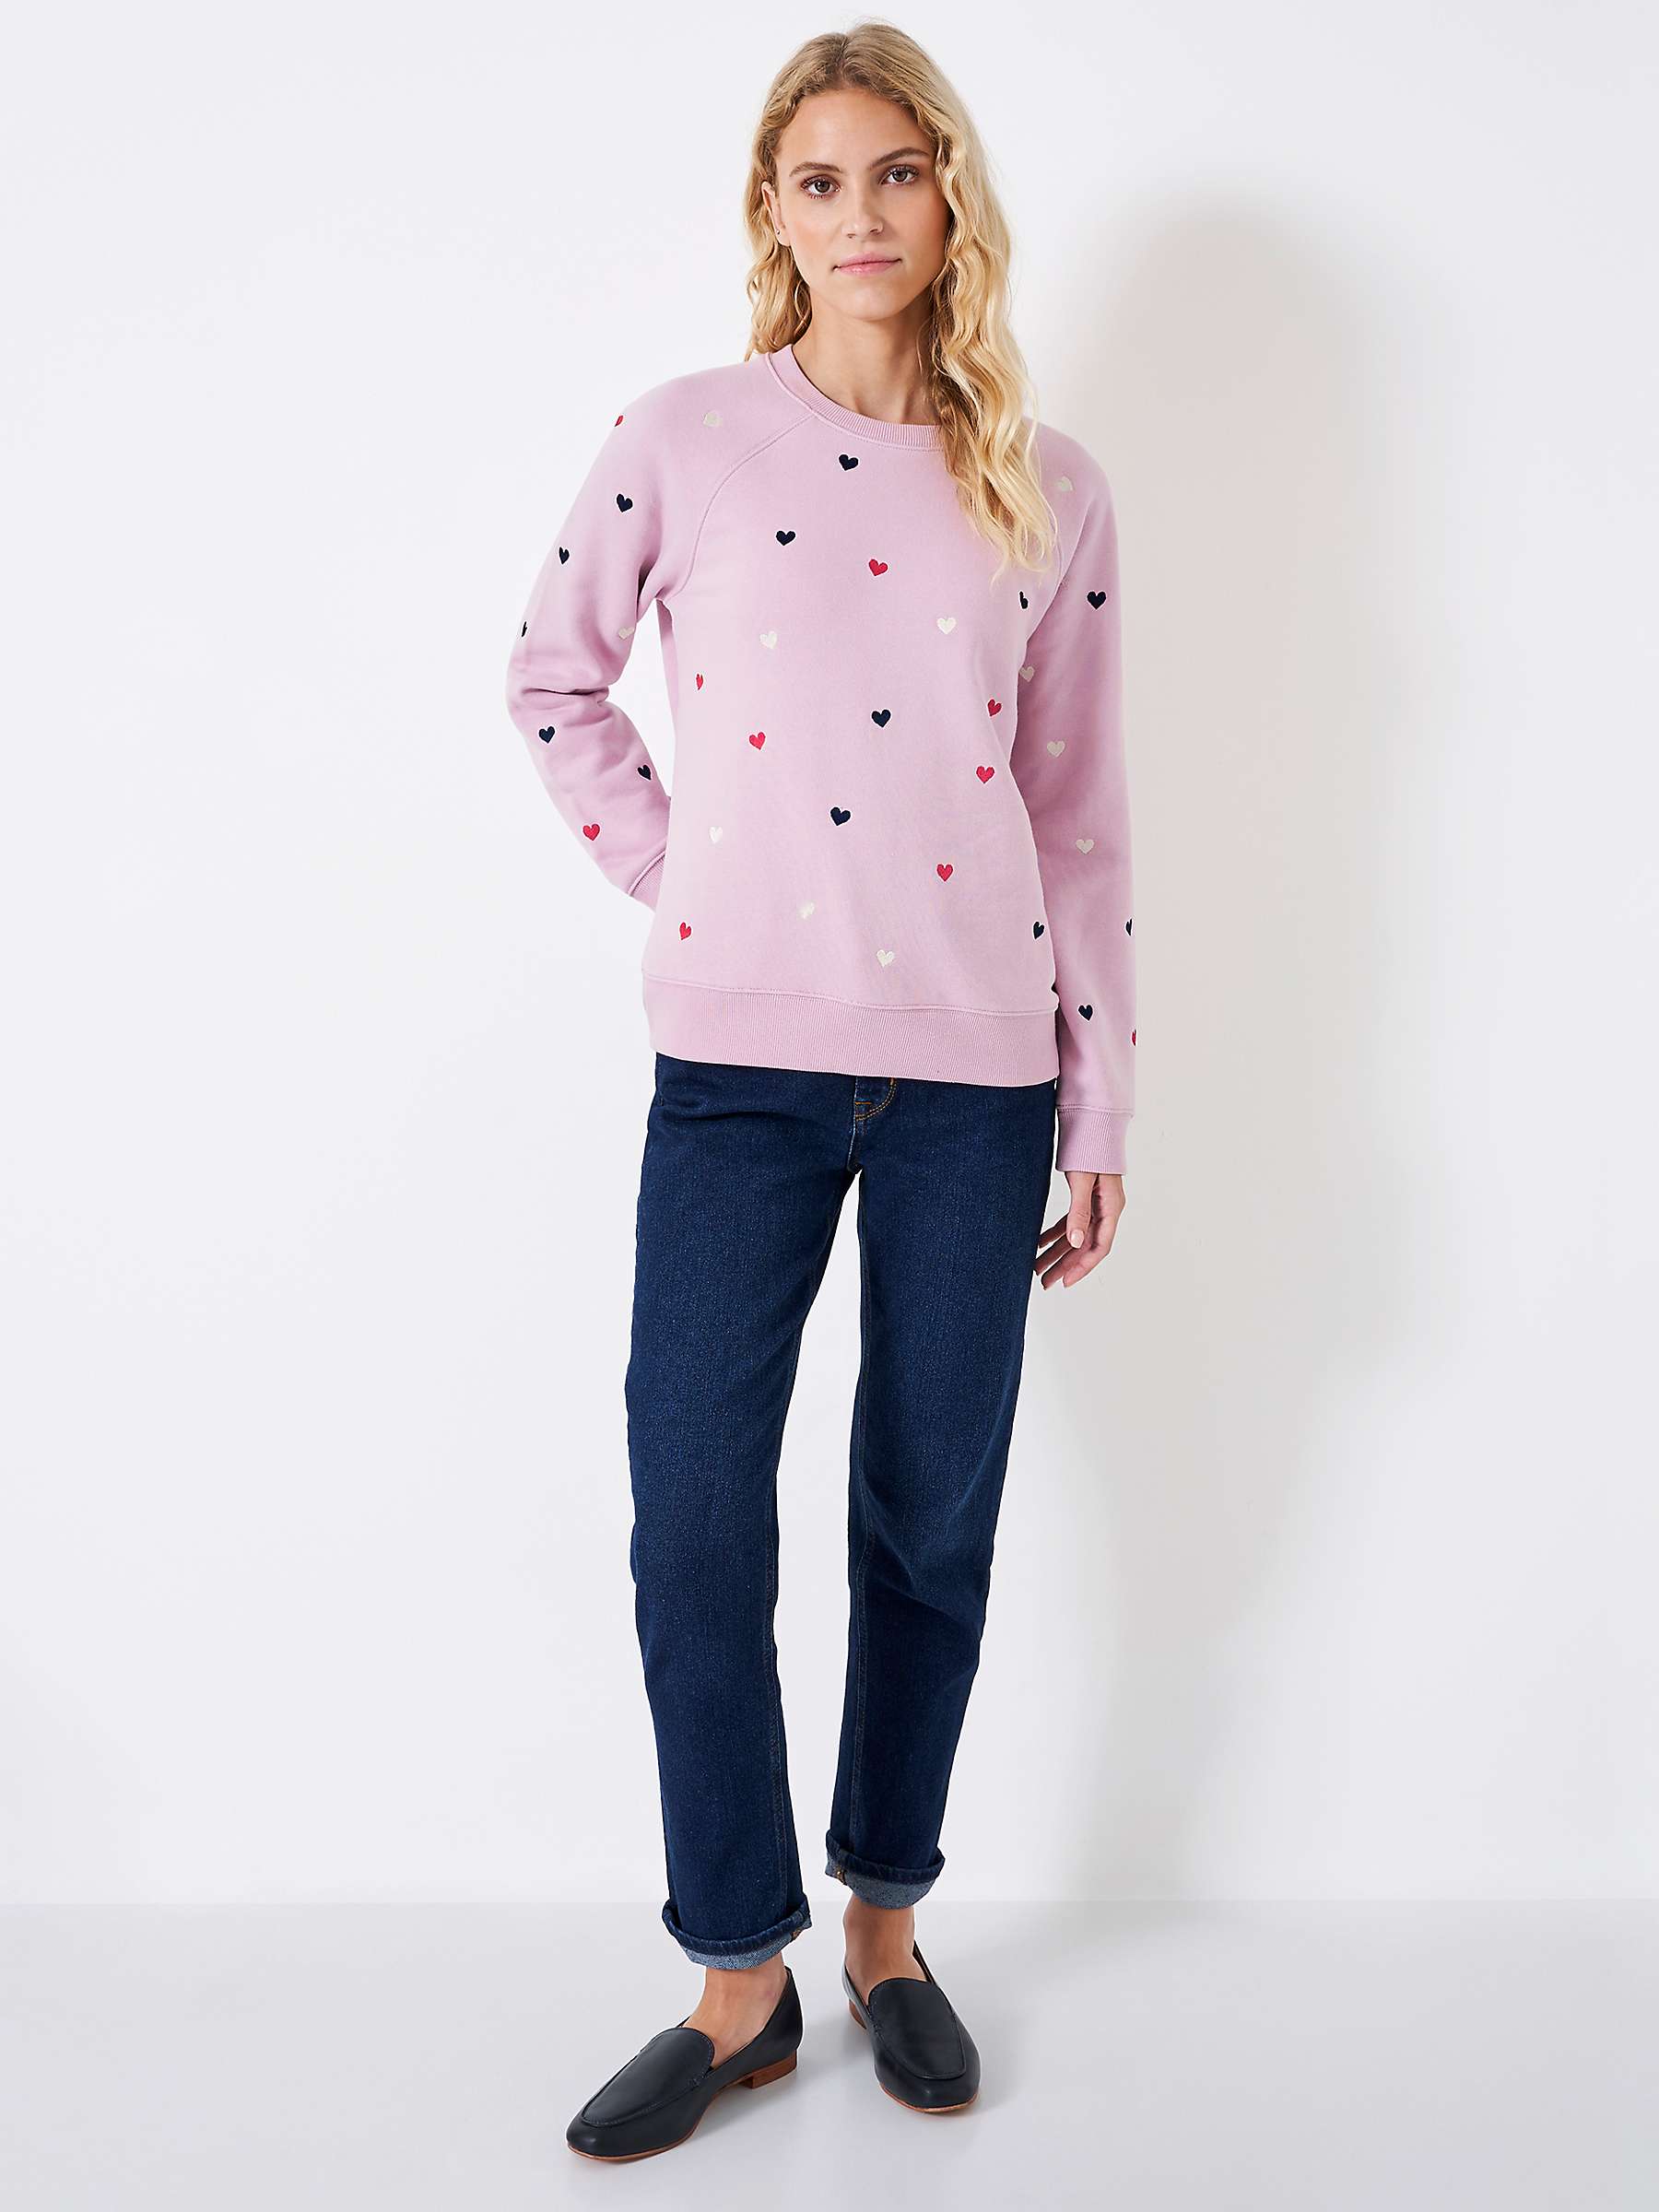 Buy Crew Clothing Heart Embroidered Sweatshirt, Bright Pink/Multi Online at johnlewis.com